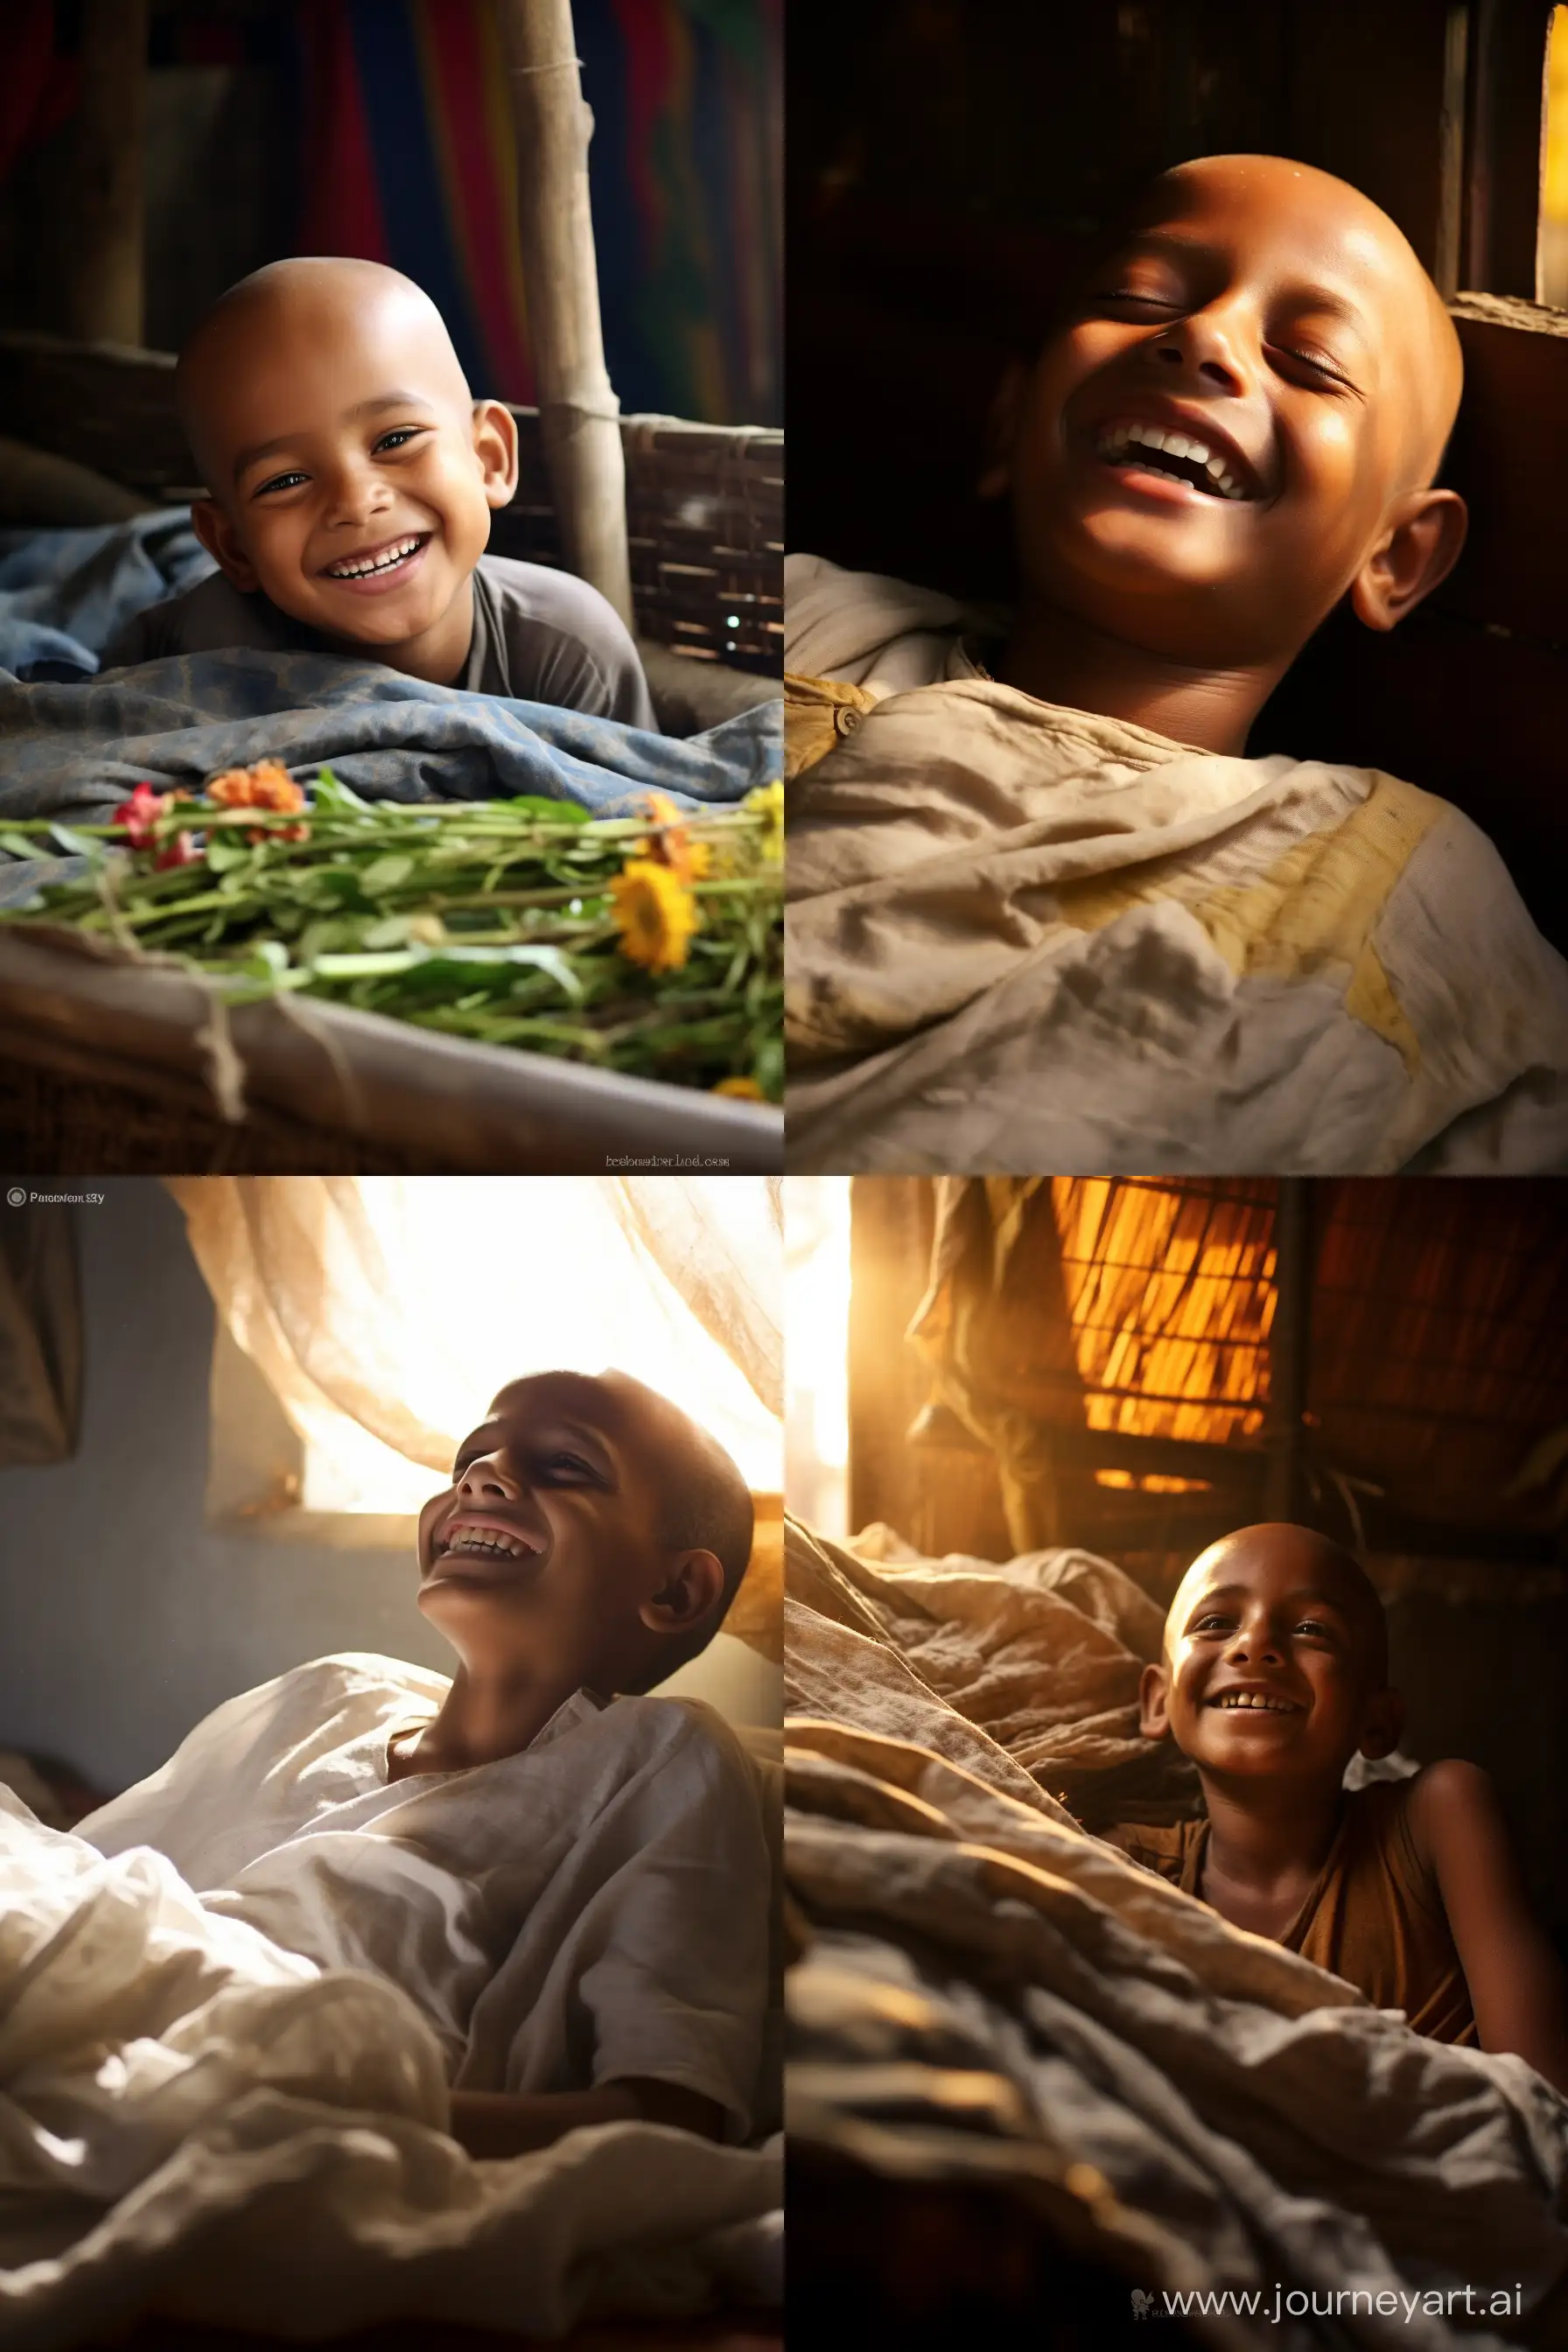 Resilient-Bangladeshi-Boy-with-a-Precious-Smile-on-Worn-Bed-Sheets